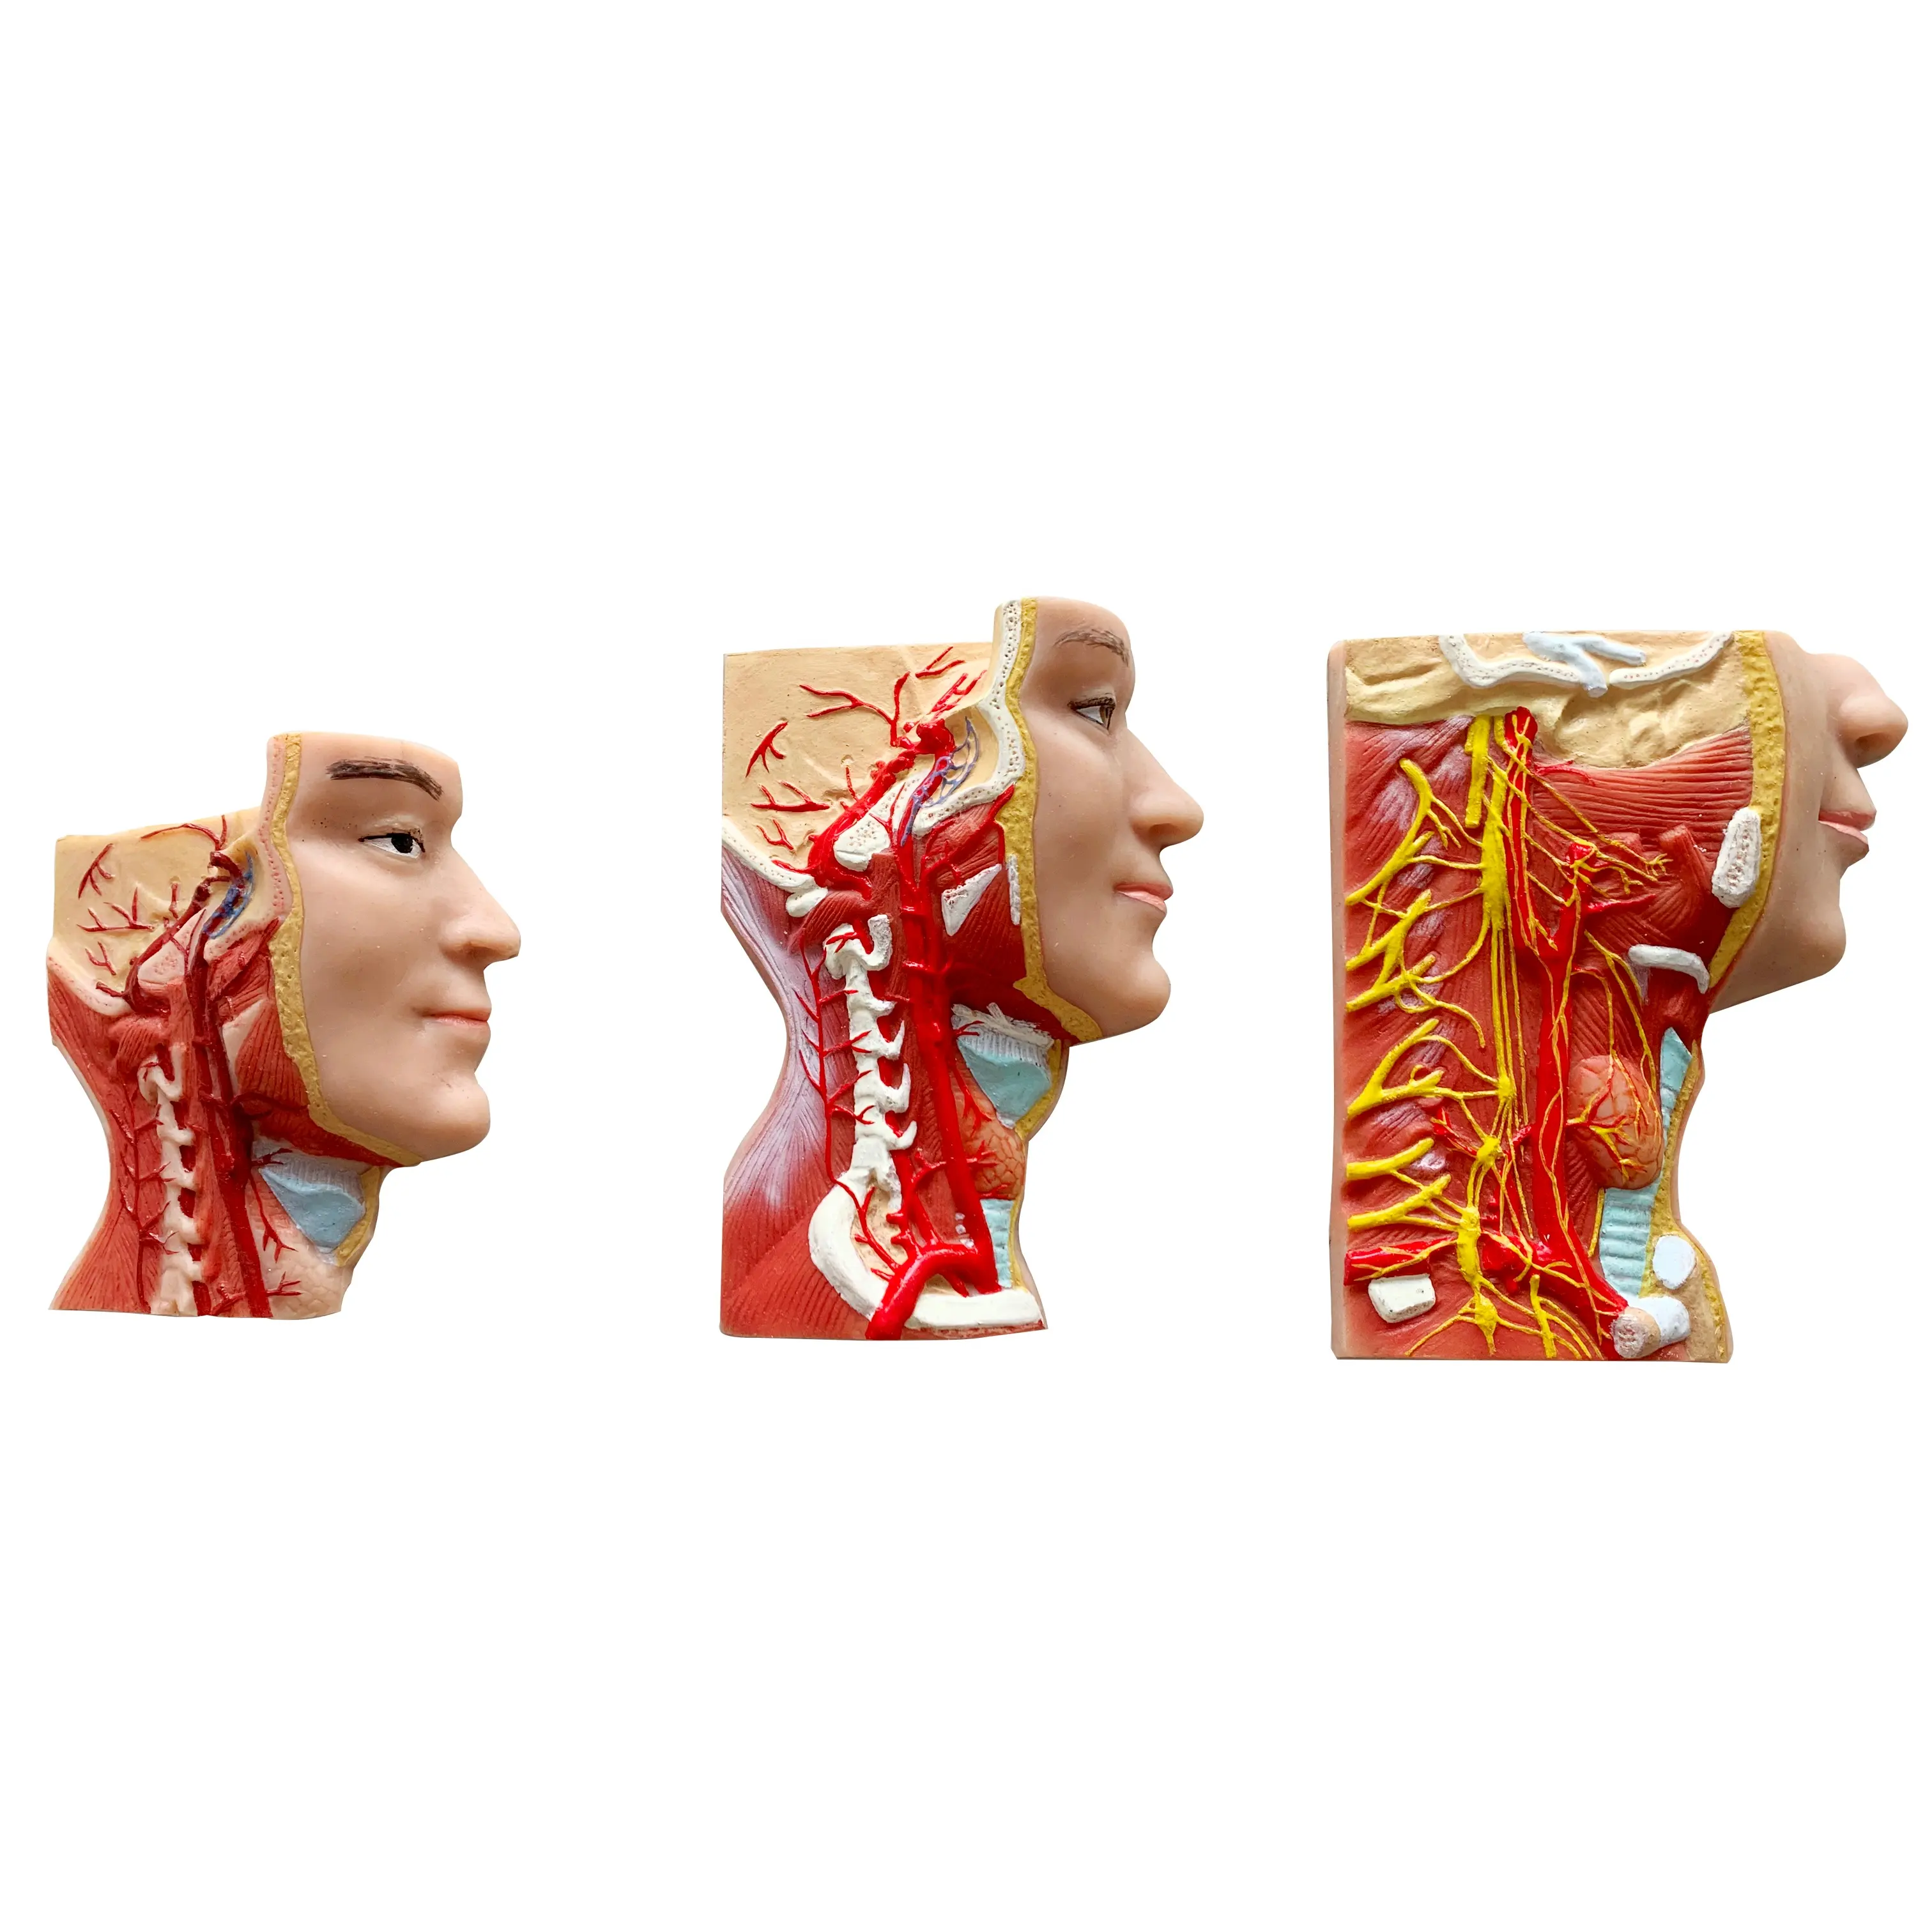 High simulation right side structure of head and neck model 3 parts